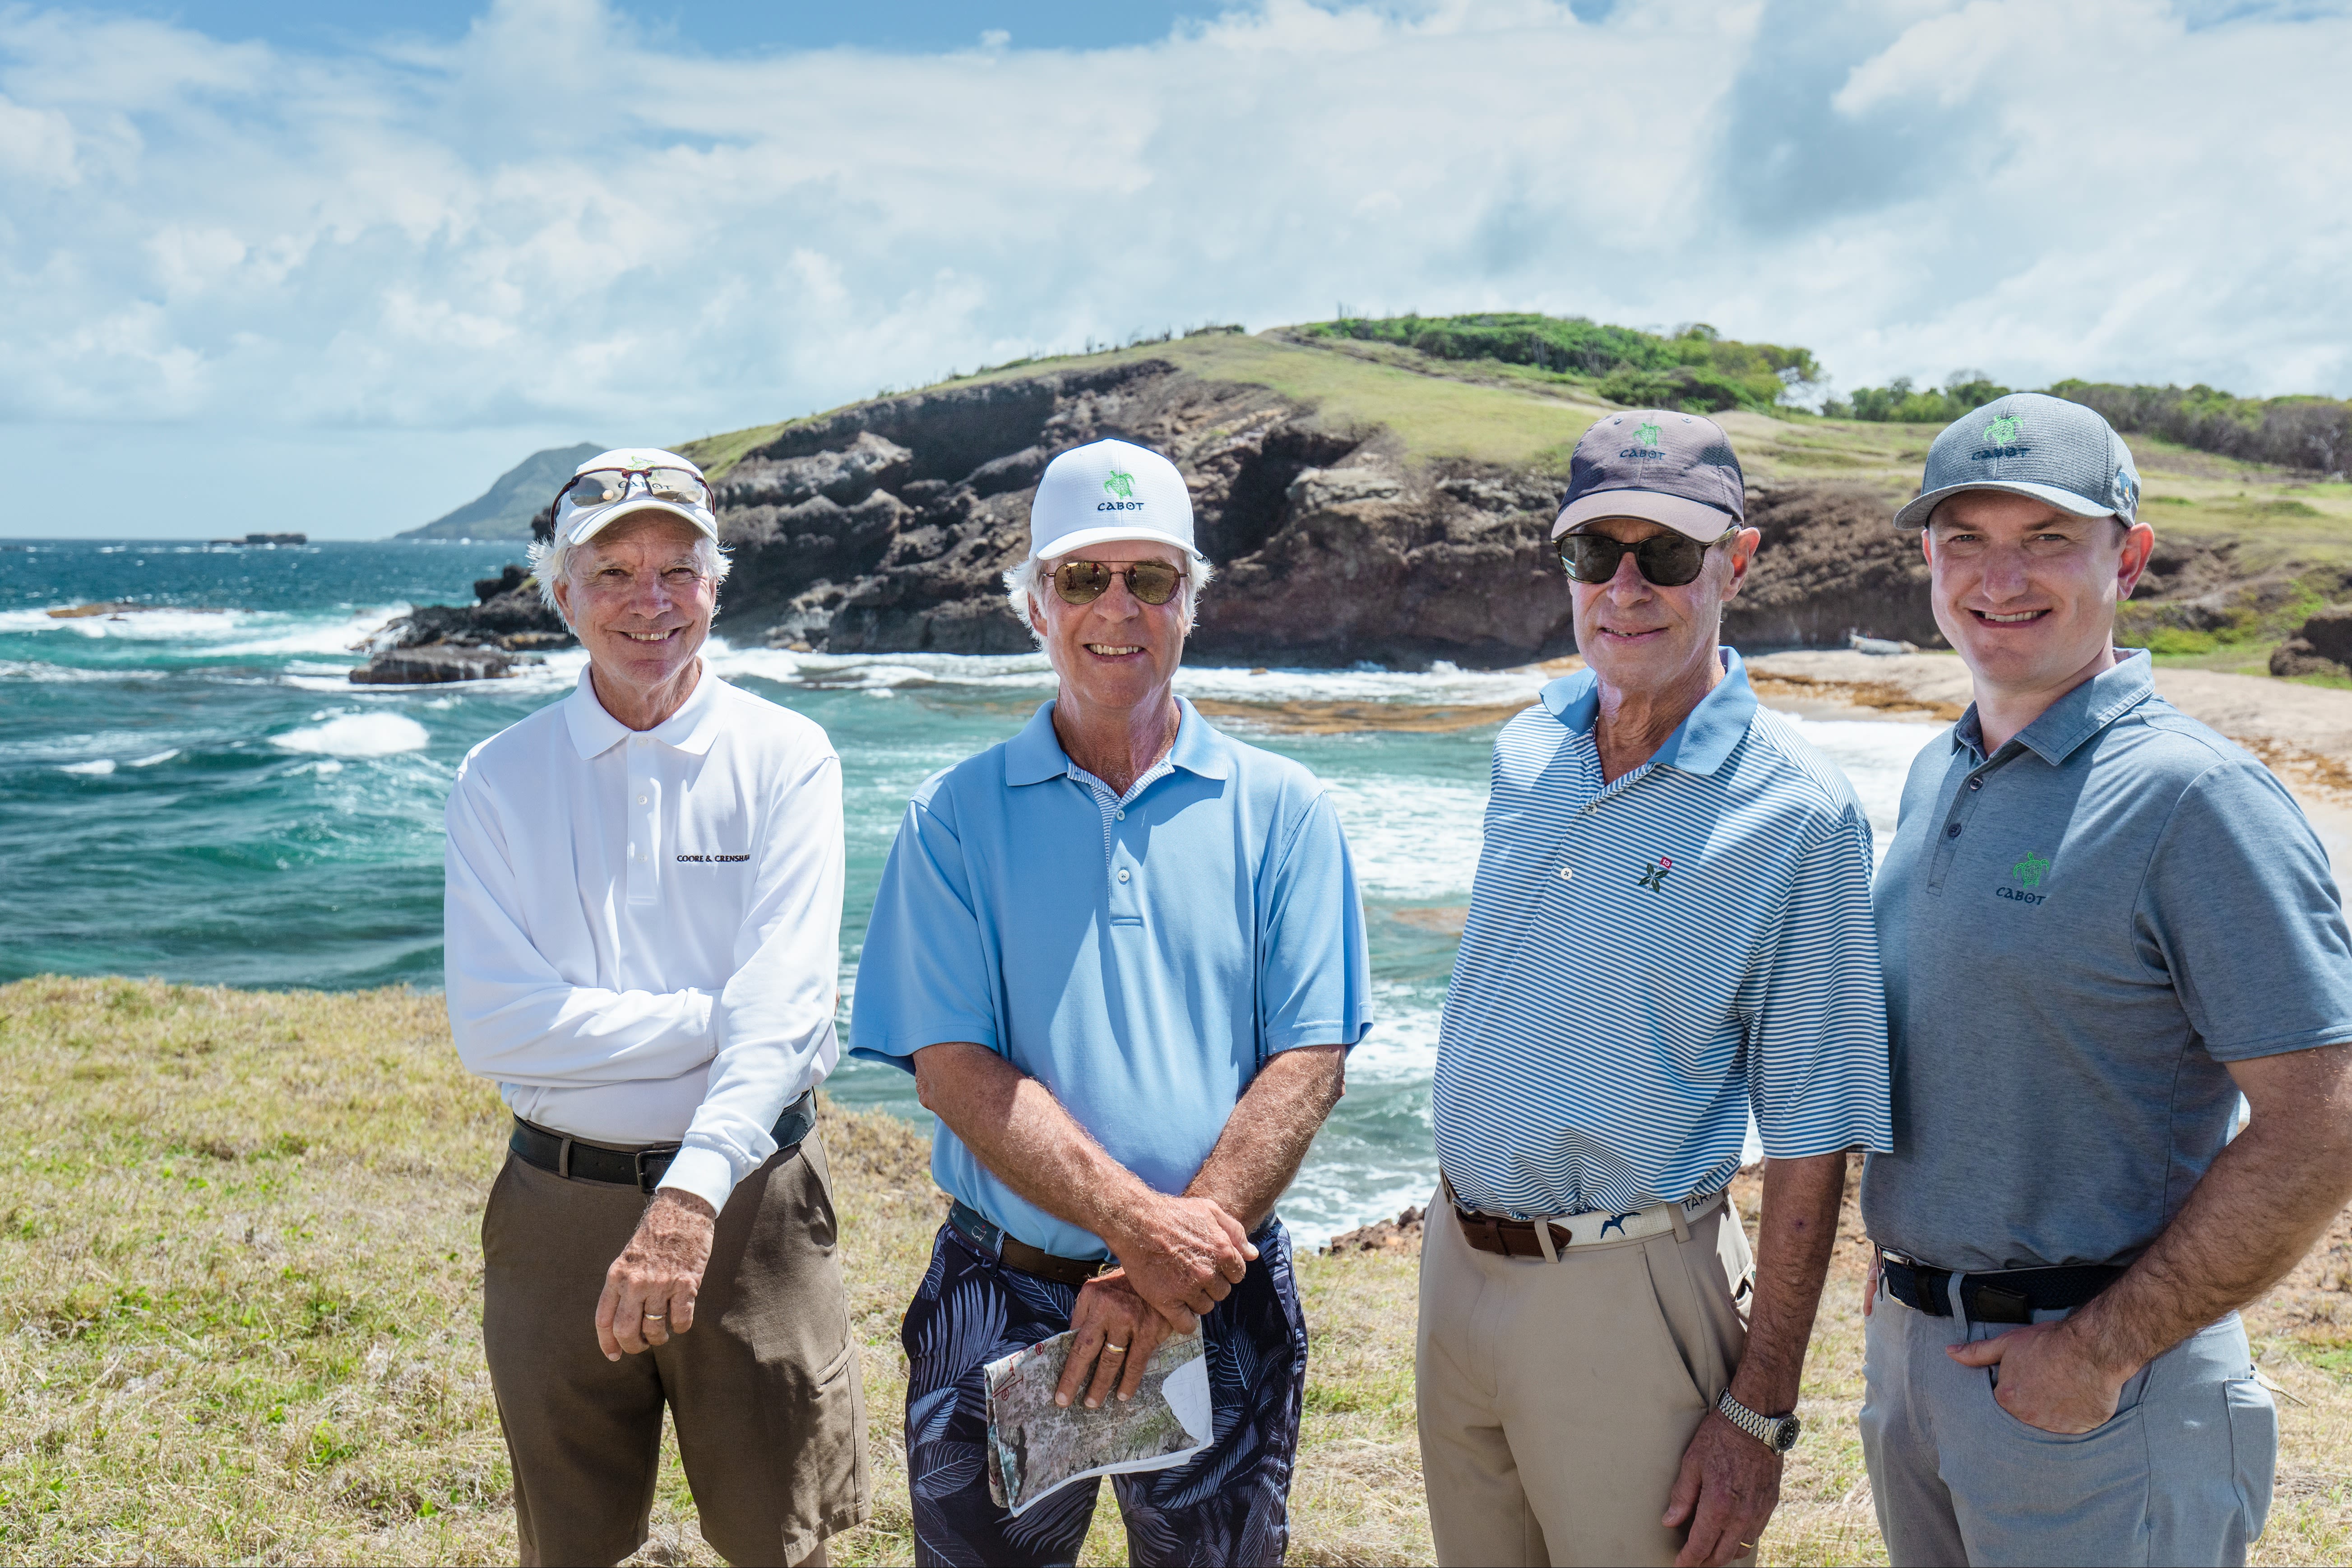 Coore, Crenshaw, Keiser and Cowan-Dewar at Cabot St. Lucia. (Jacob Sjoman/Cabot)